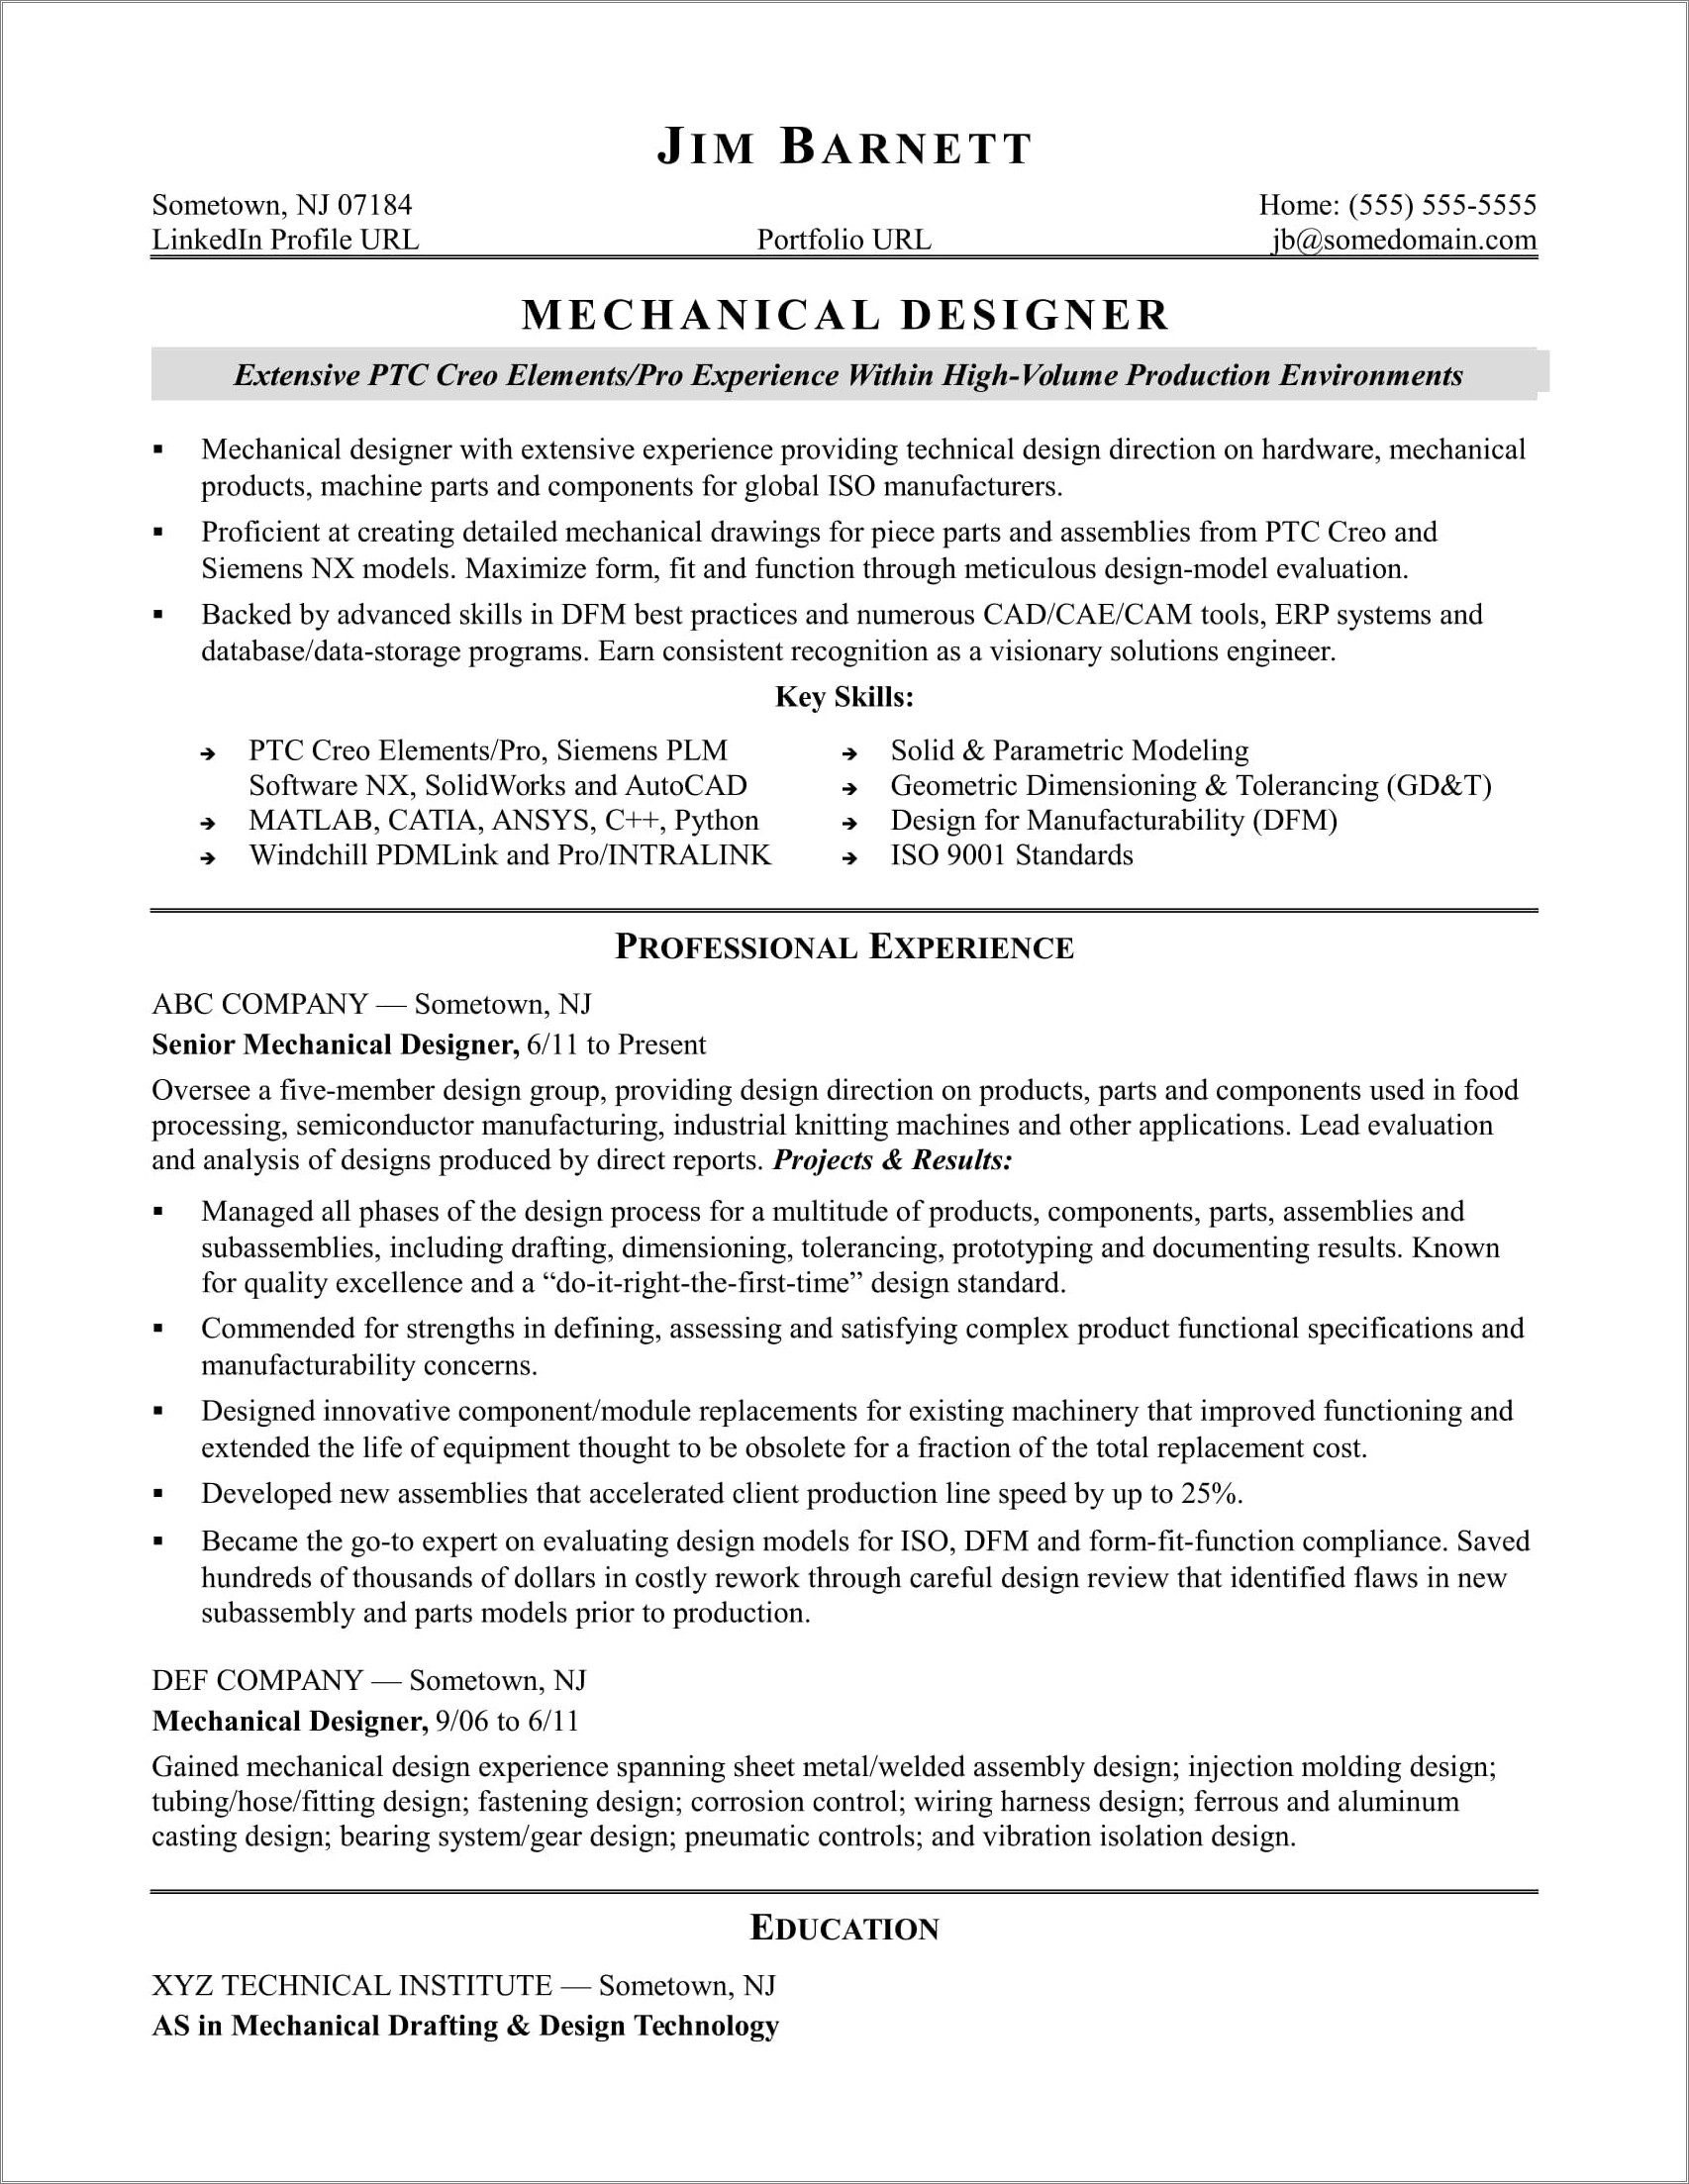 11 Years Experience Engineering 2 Page Resume